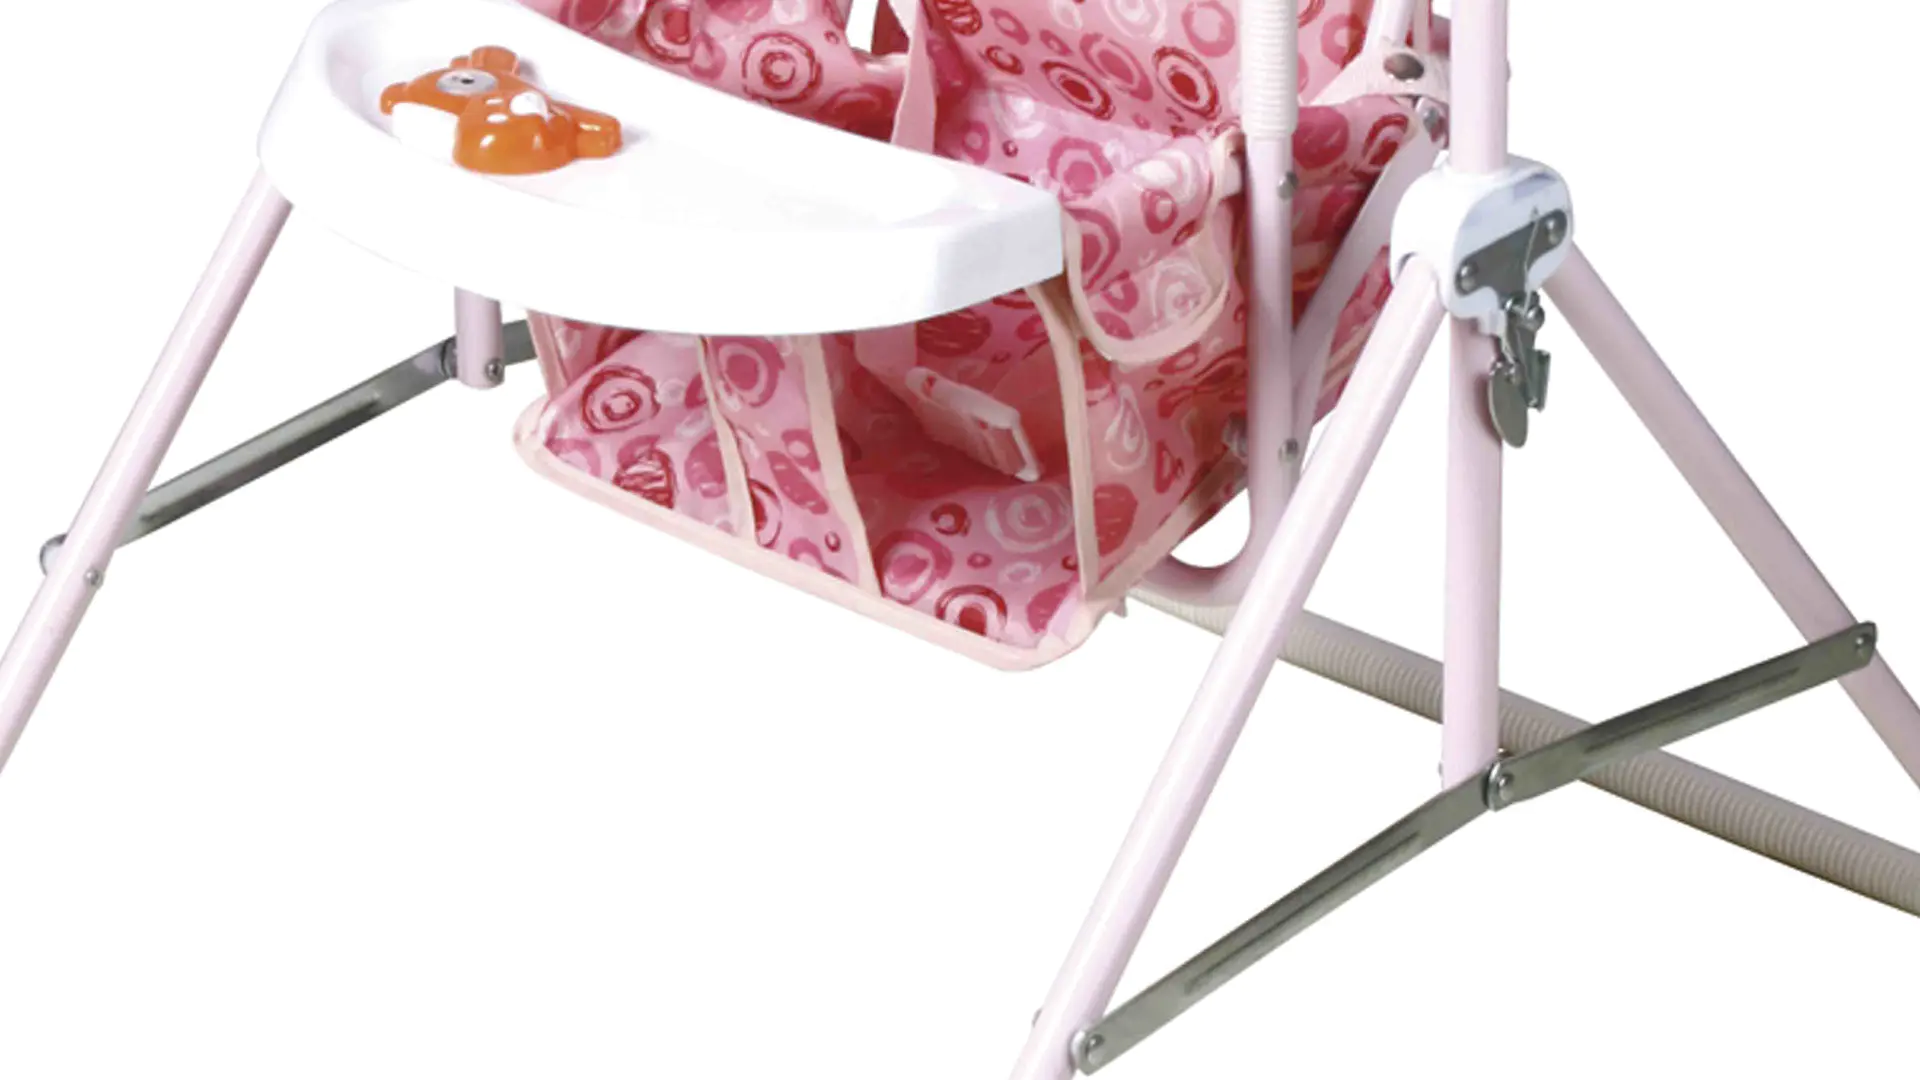 Aoqi babies swing with good price for kids